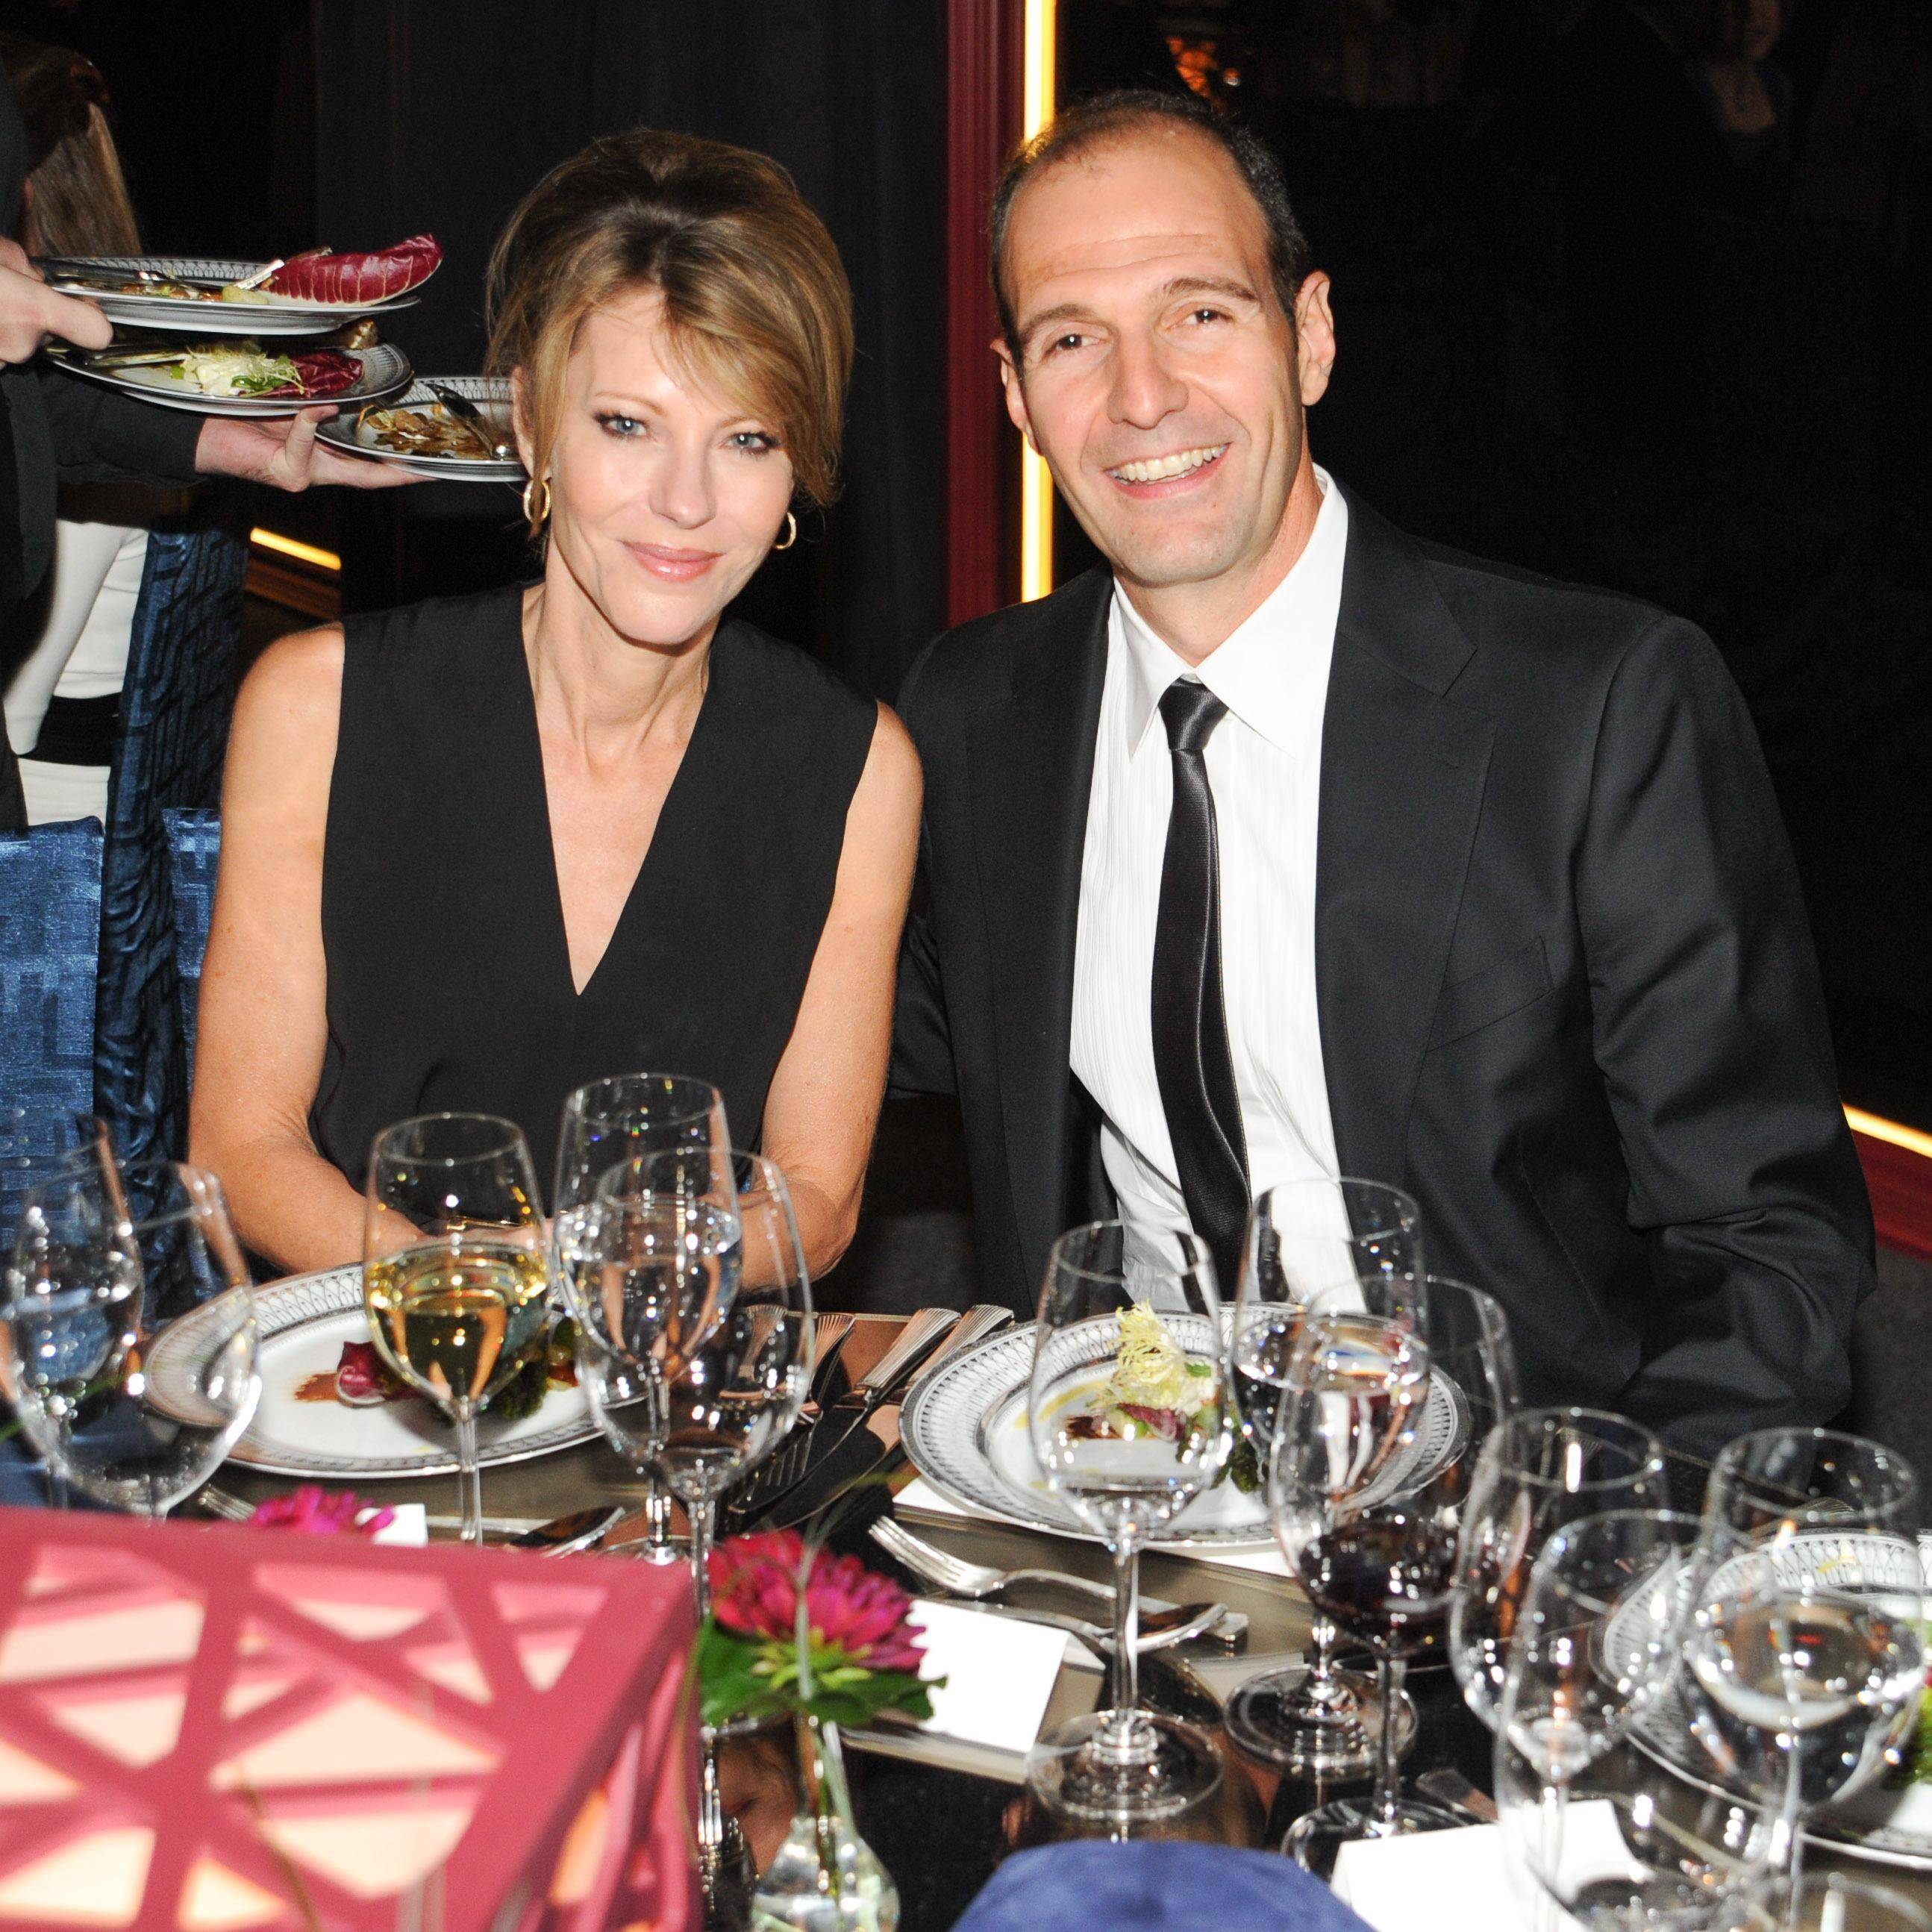 SALVATORE FERRAGAMO Sponsors the Inaugural Gala of the WALLIS ANNENBERG CENTER FOR THE PERFORMING ARTS- Part II